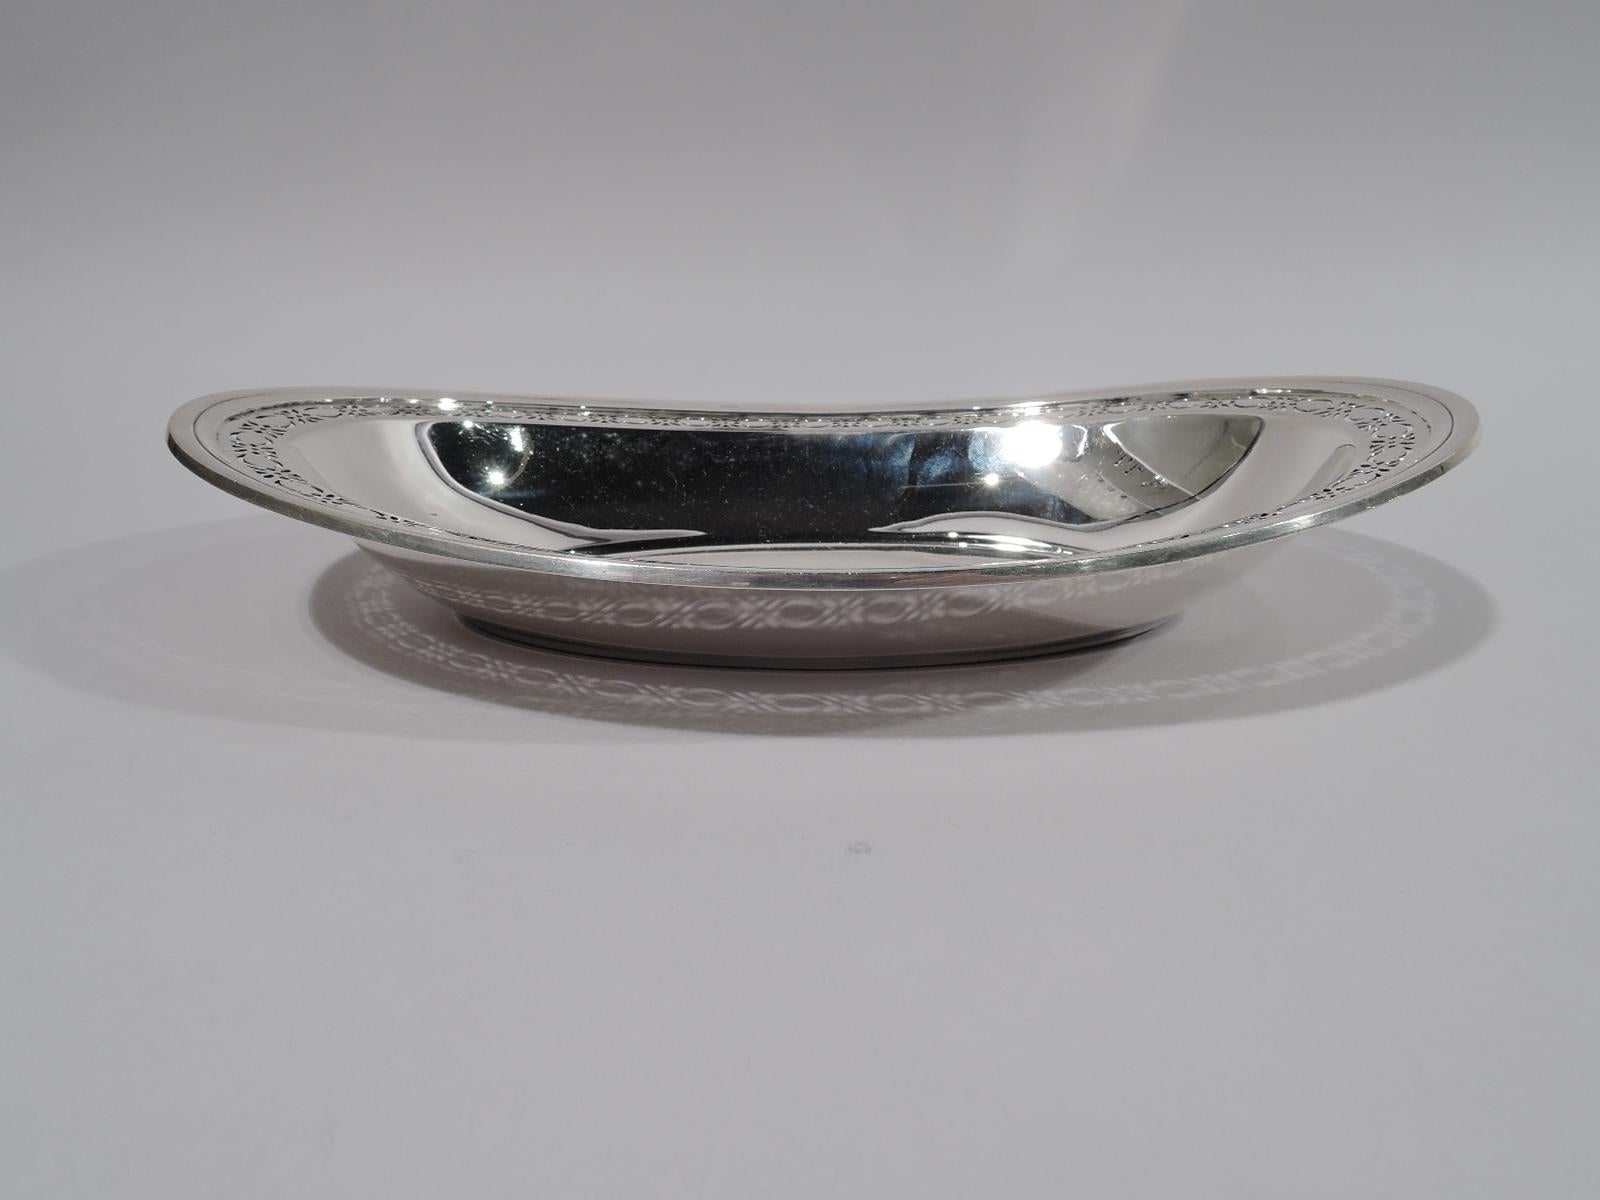 Art Deco sterling silver bread tray. Made by Tiffany & Co. in New York, circa 1925. Boat-form oval with pierced semi-abstract floral border. Spare ornament and nice heft. Fully marked including director’s letter m and pattern no. 20600K (first